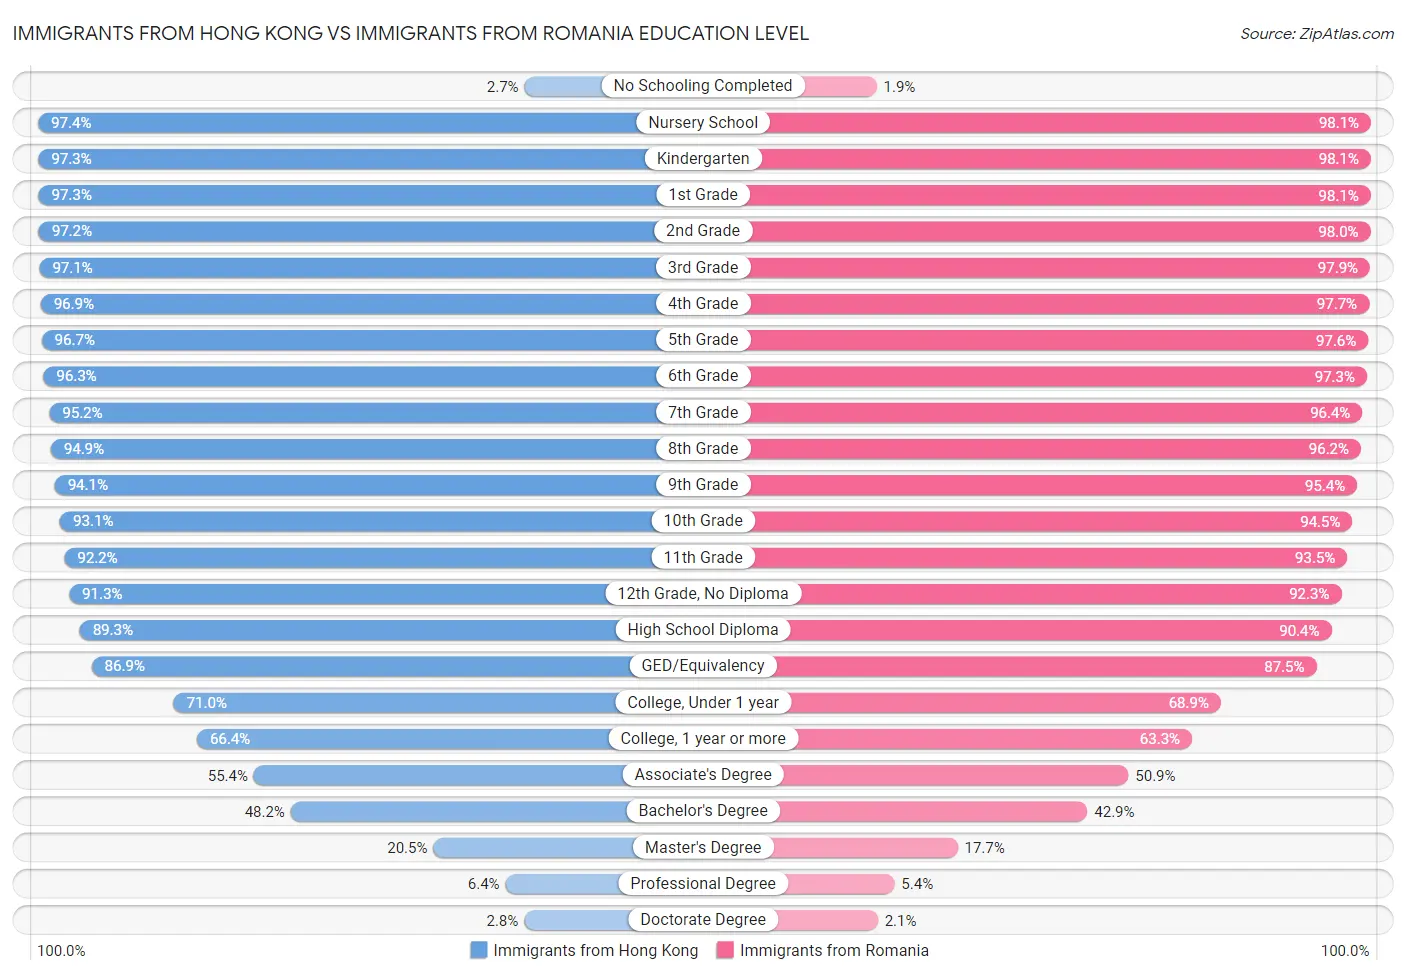 Immigrants from Hong Kong vs Immigrants from Romania Education Level